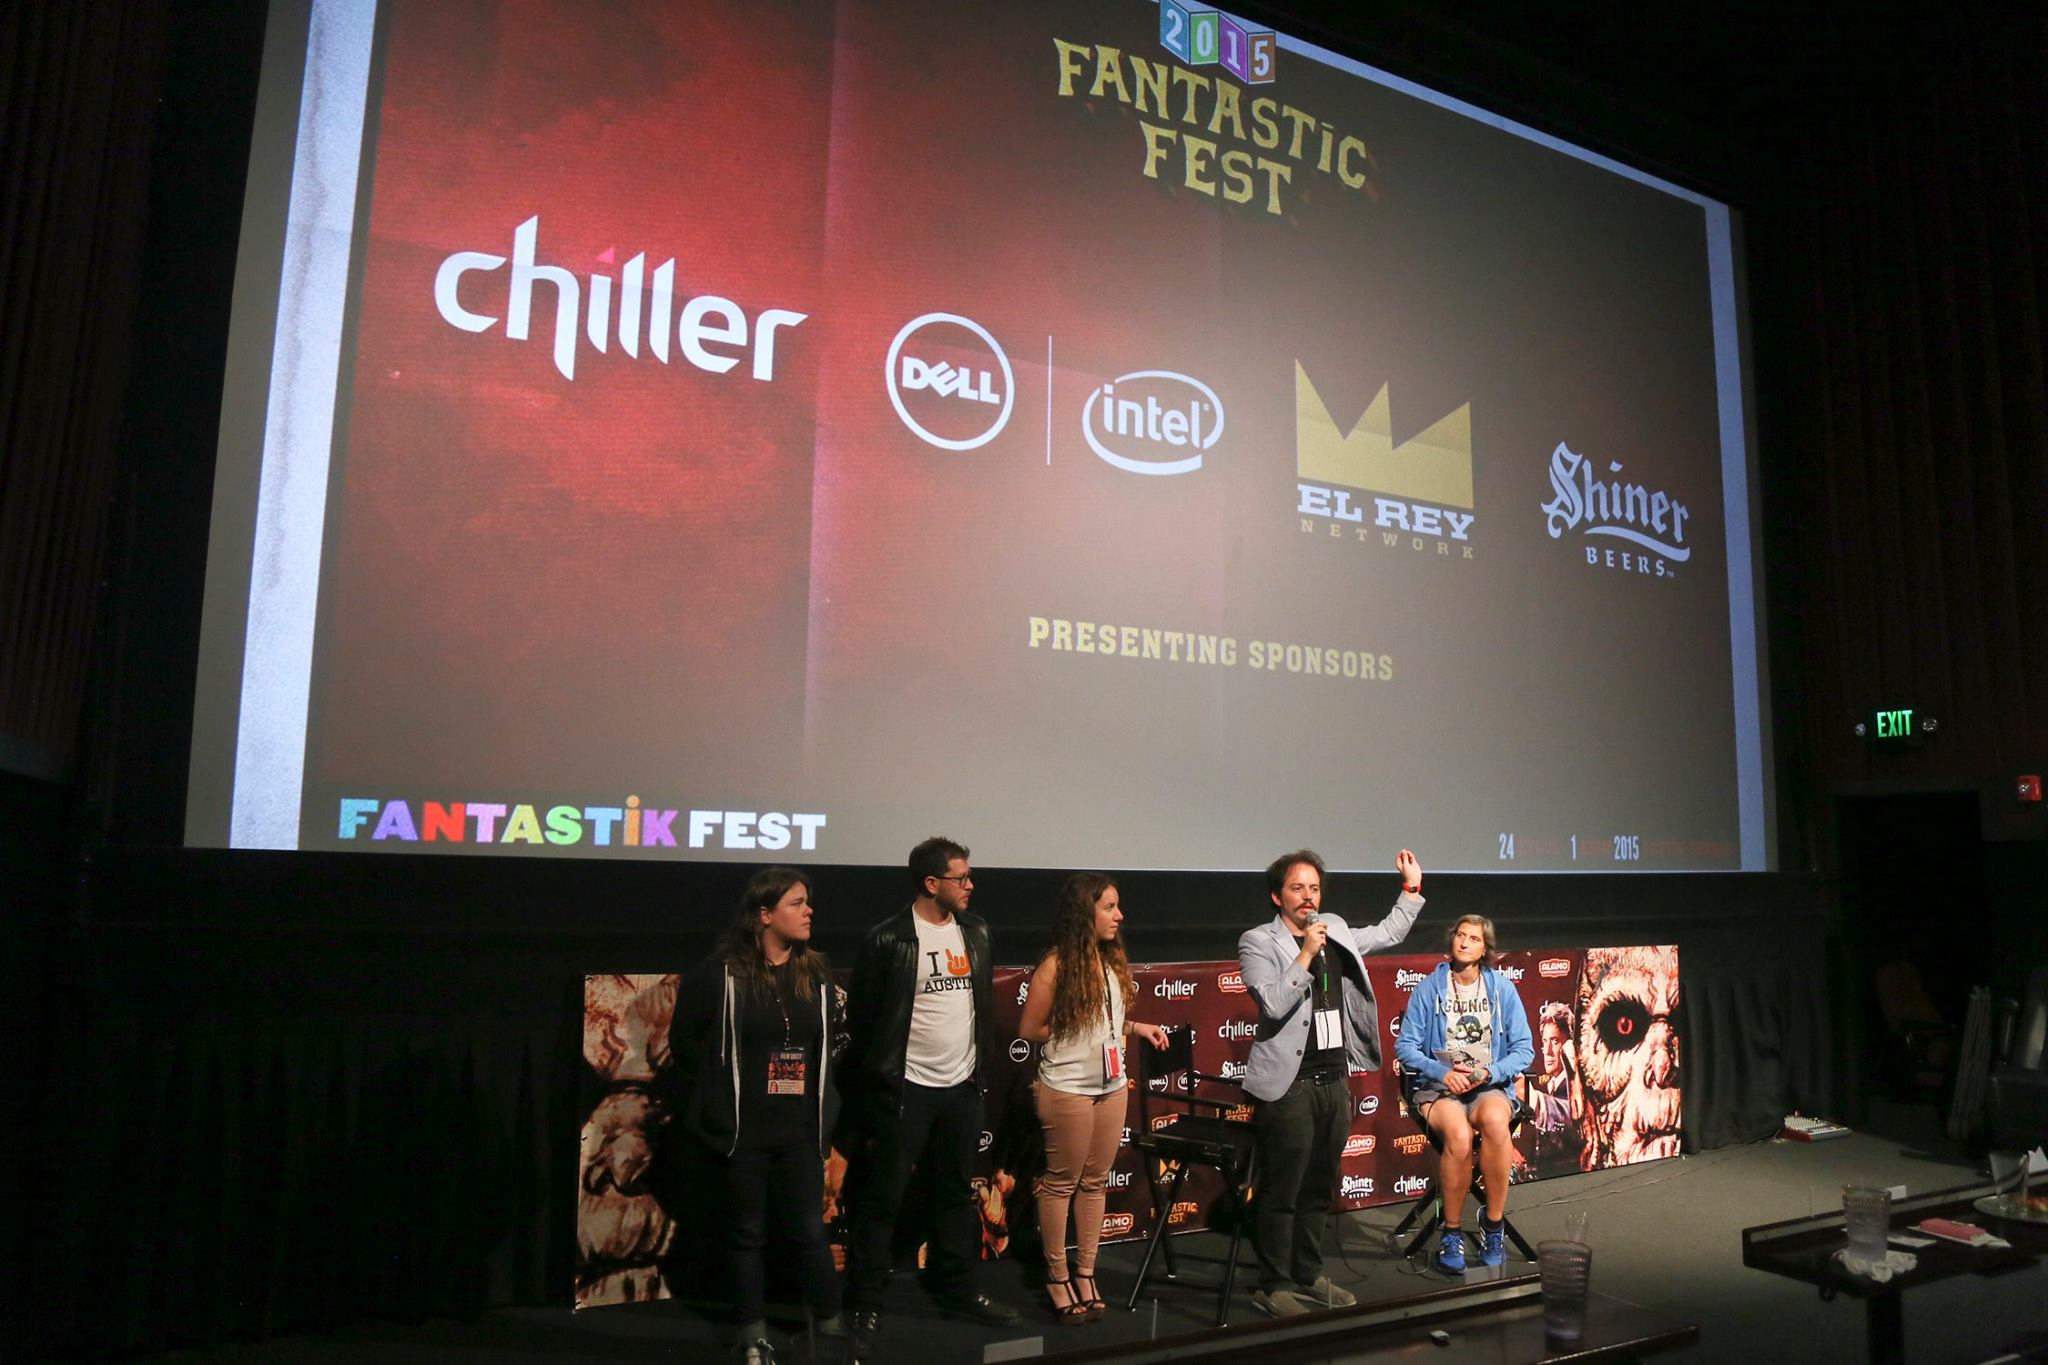 Isaac Ezban with producers Miriam Mercado and Victor Shuchleib and assistant director Stephanie Beauchef at the world premiere of THE SIMILARS at Fantastic Fest (Sept 2015, Austin, Texas)